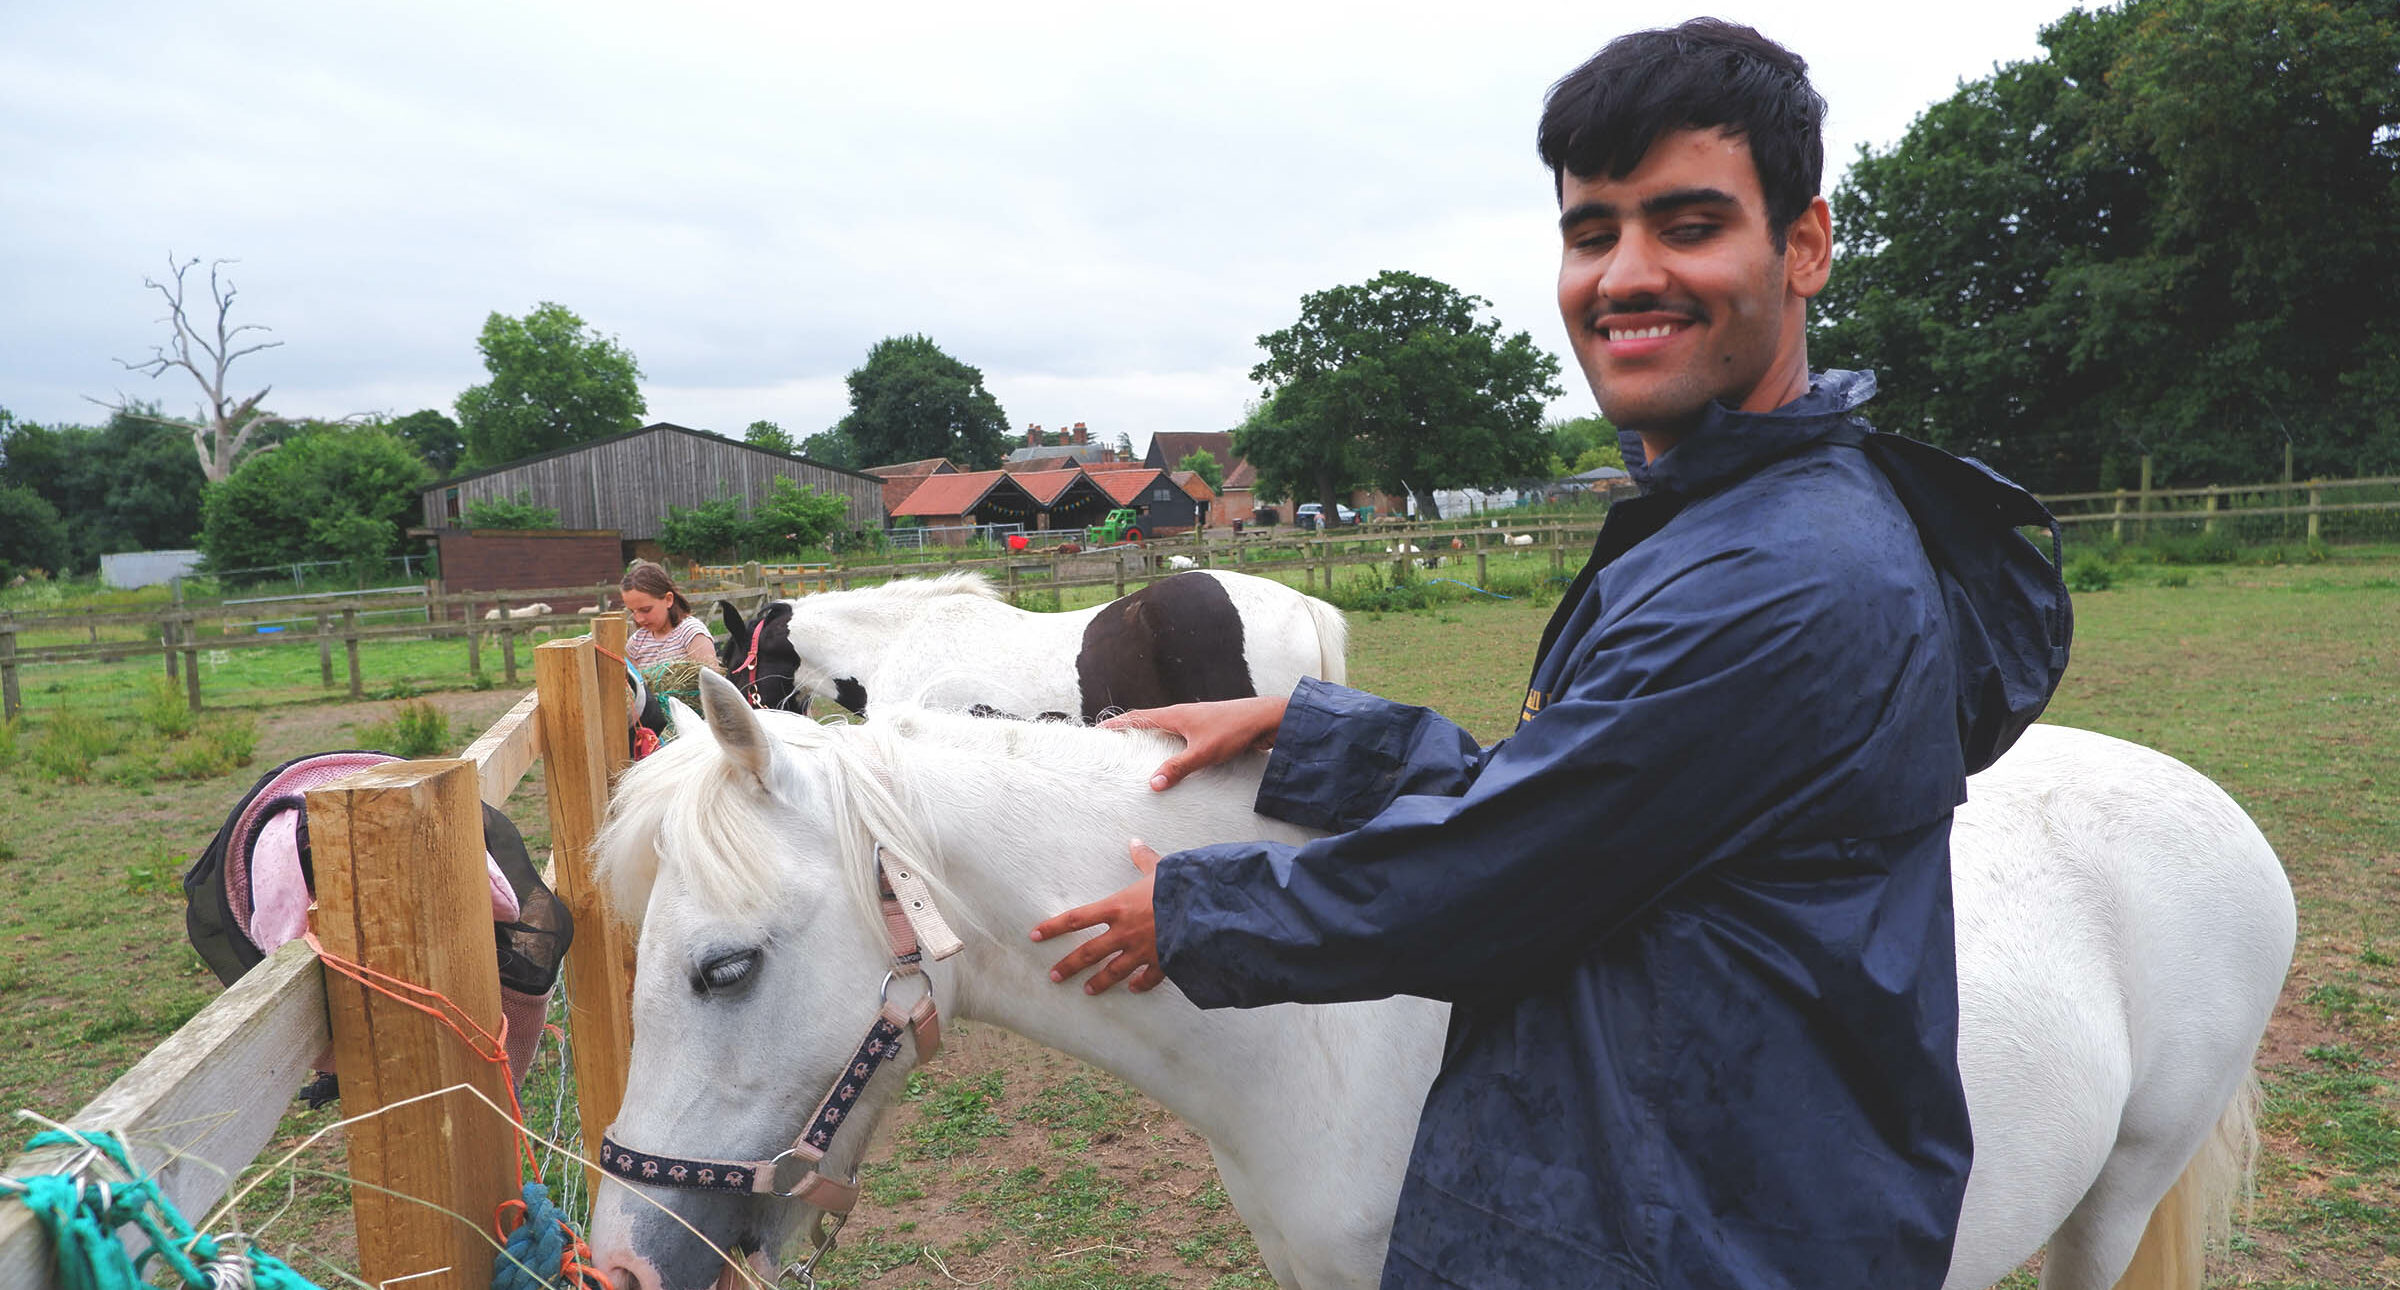 A young person smiling next to a horse